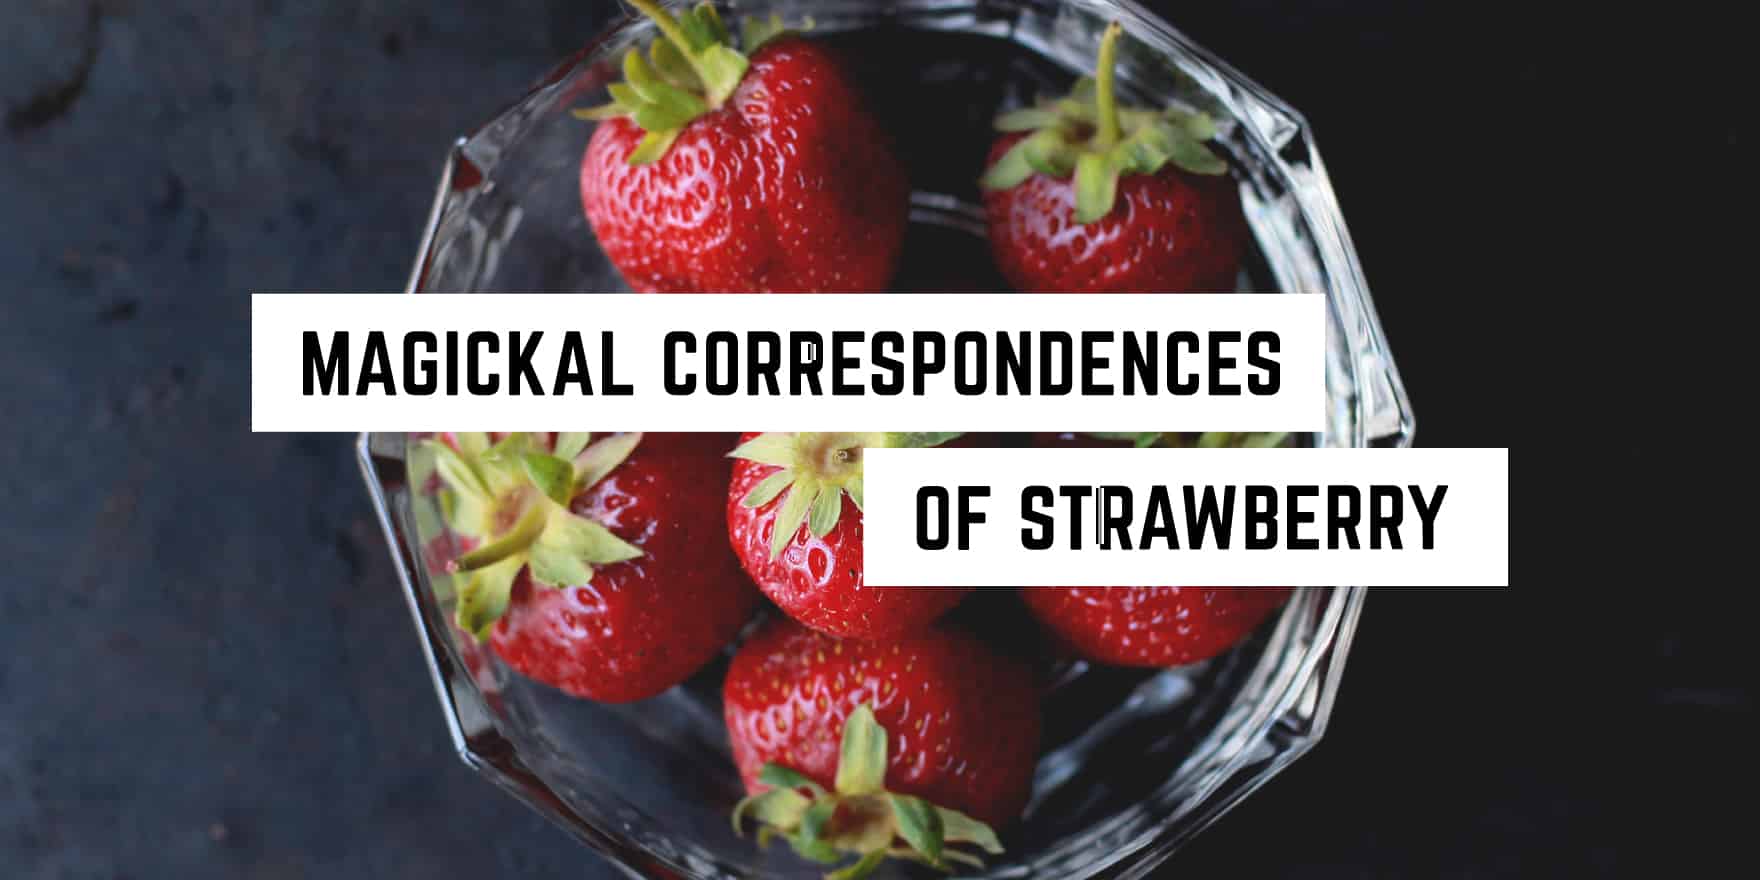 A bowl of vibrant, fresh strawberries with a caption about their mystical significance: "occult correspondences of strawberry.